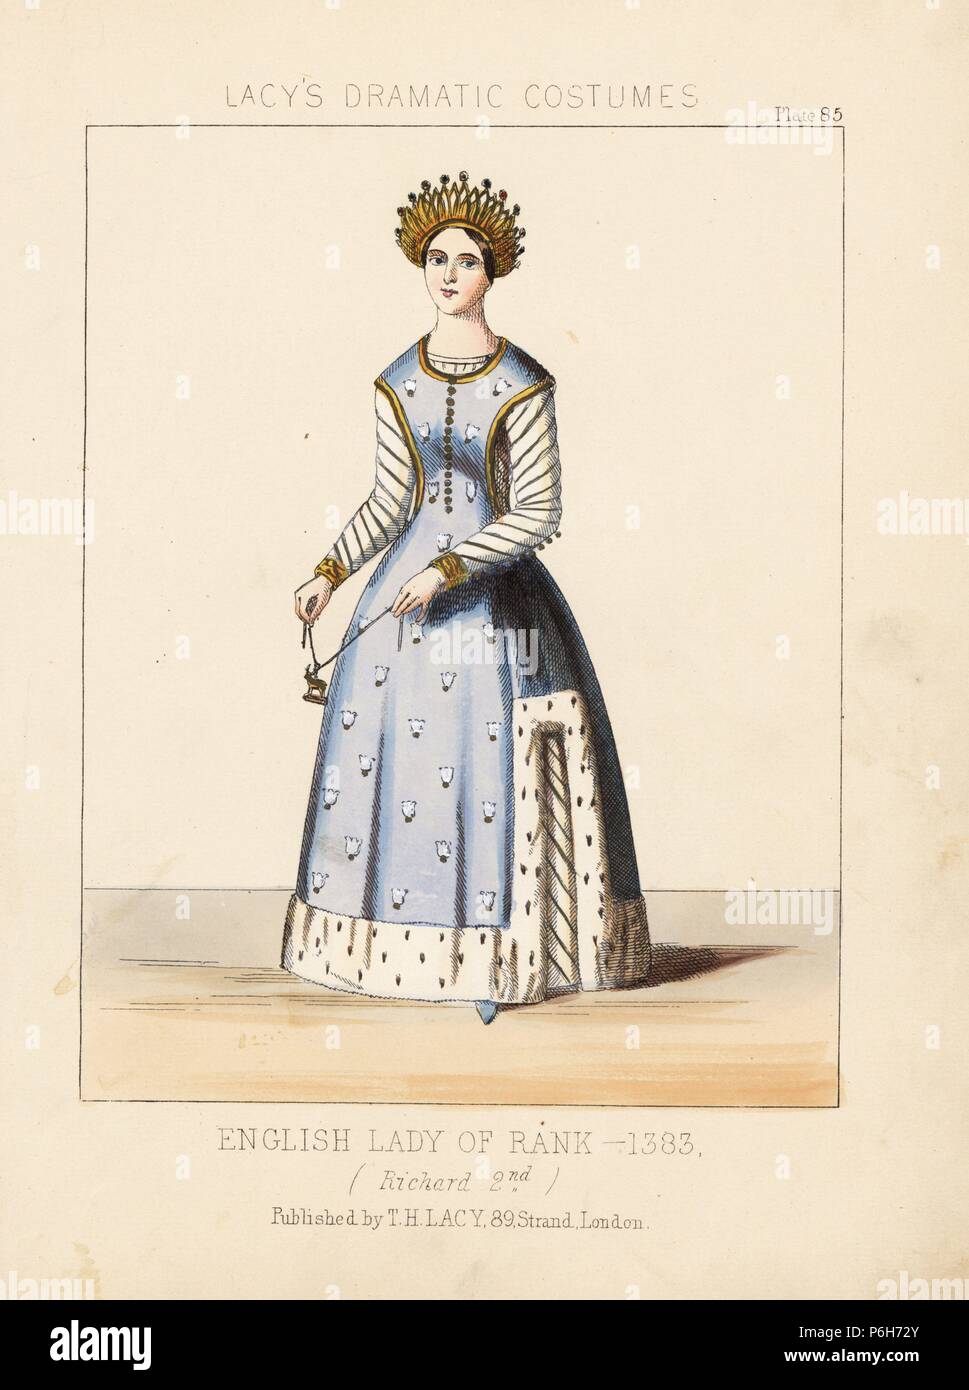 English lady of rank, 1383, reign of Richard II. She carries the king’s badge or cognizance, a white hart with a crown of gold on its neck. Her ermine-trimmed dress is sky blue with white embroidered lilies, part of the king’s crest. Taken from 'Costumes of British Ladies from the Time of William the First to the Reign of Queen Victoria,” London, 1840. Handcoloured lithograph from Thomas Hailes Lacy's 'Female Costumes Historical, National and Dramatic in 200 Plates,' London, 1865. Lacy (1809-1873) was a British actor, playwright, theatrical manager and publisher. Stock Photo